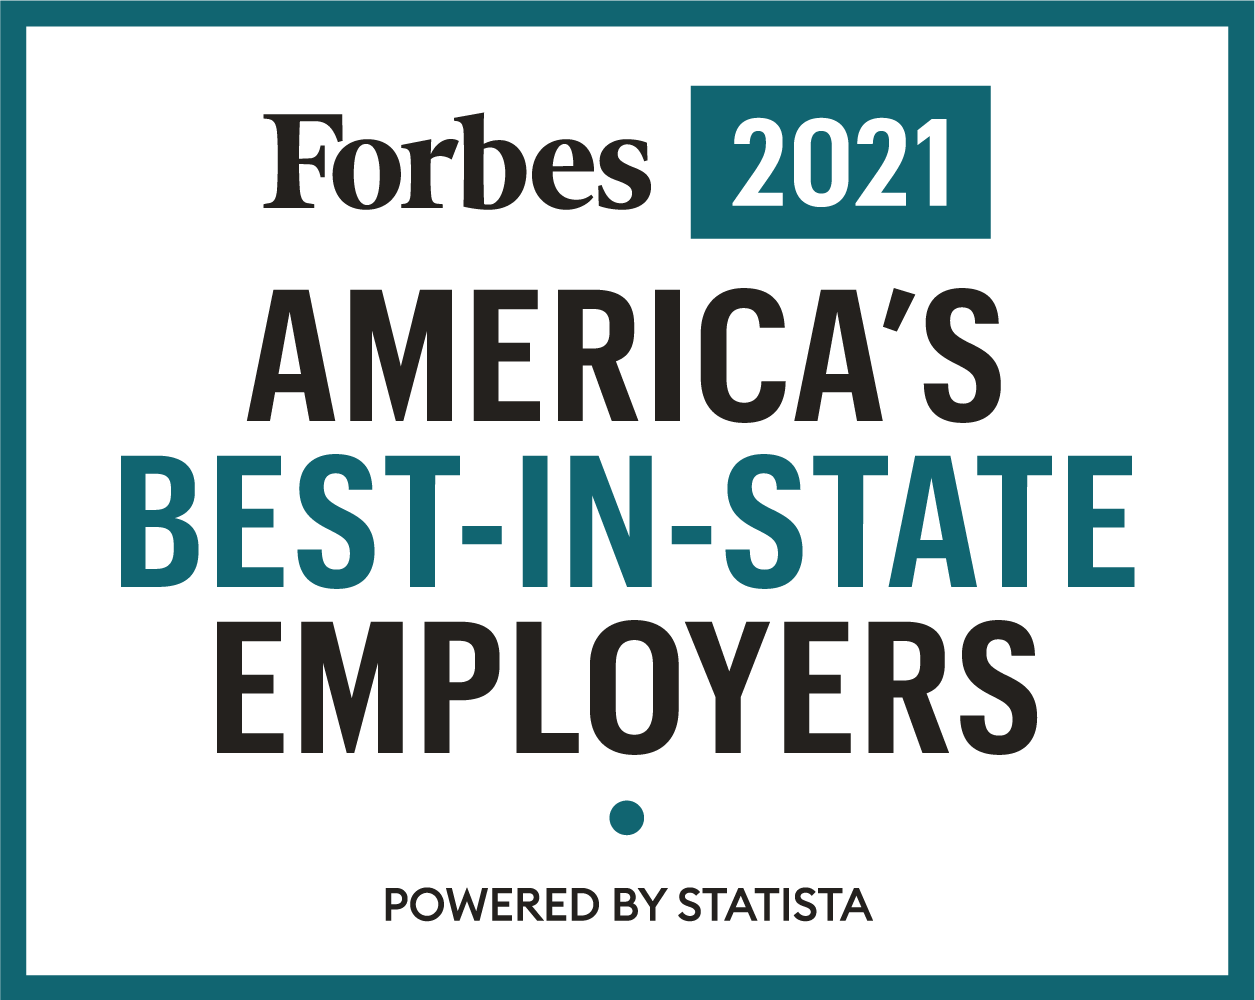 Forbes 2021 AMERICA BEST-IN-STATE EMPLOYERS